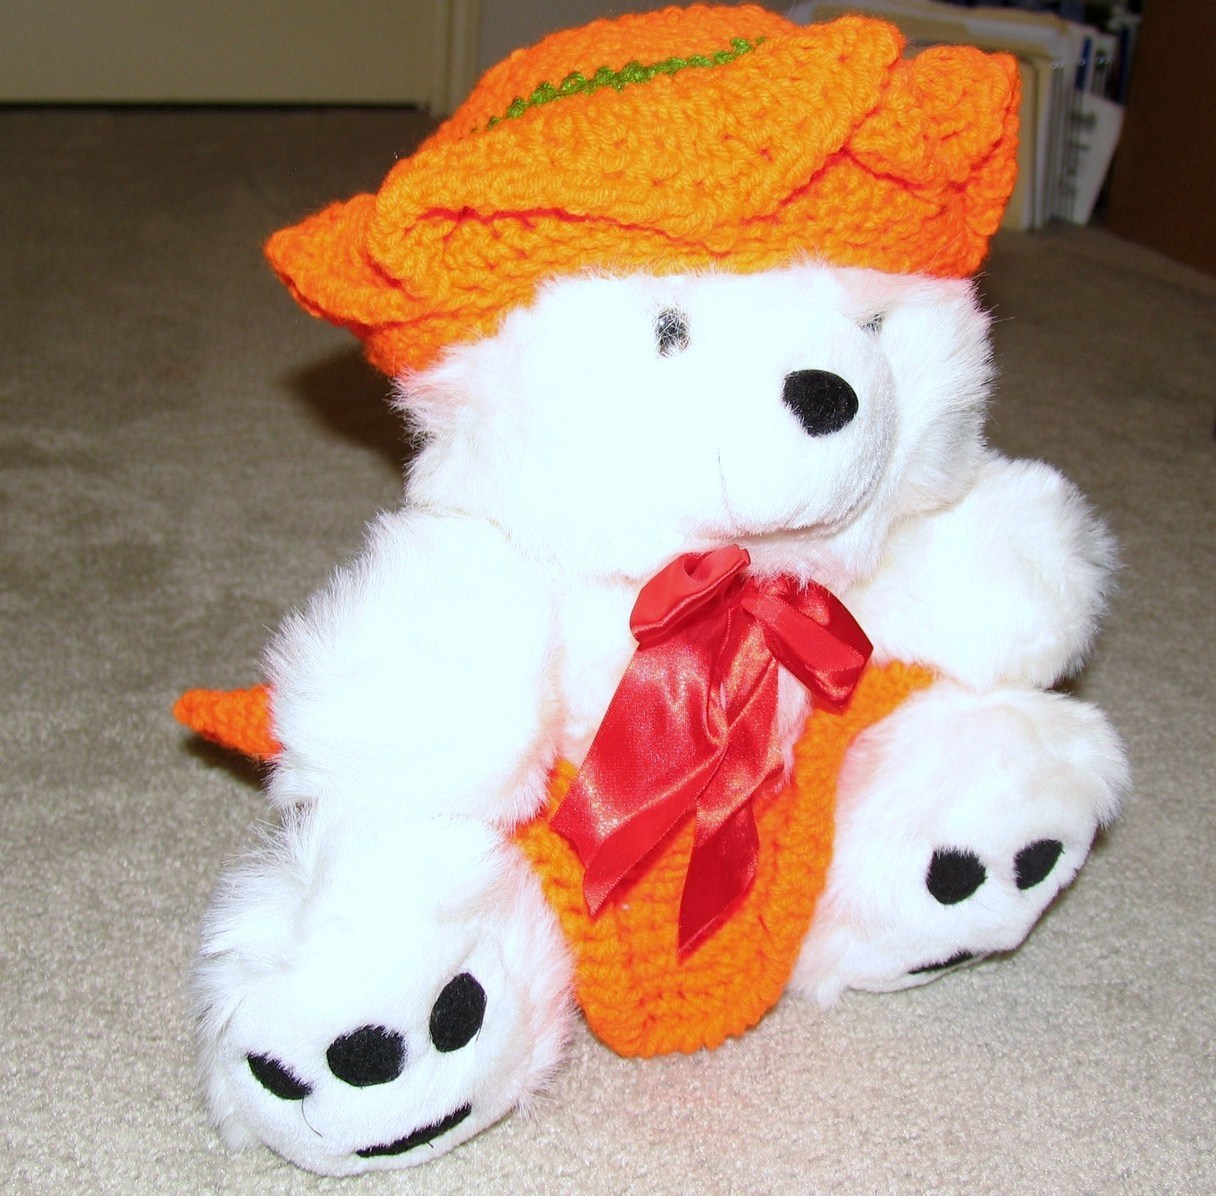 Primary image for White 17" Plush Teddy Bear w Custom Crocheted Outfit